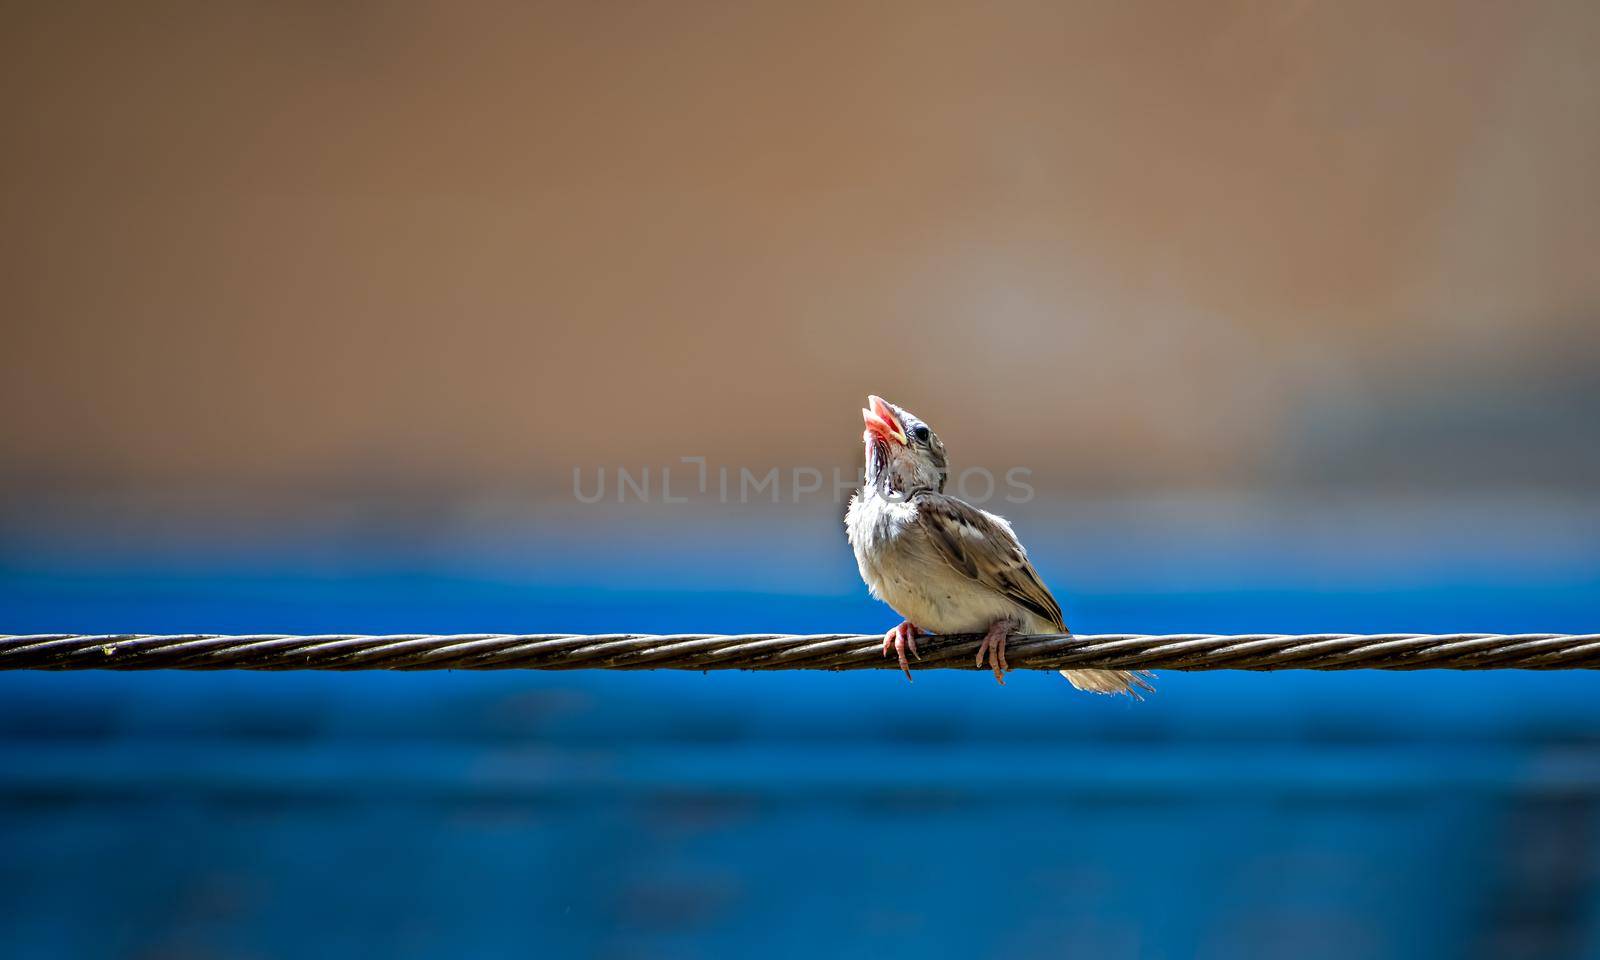 Hungry baby sparrow barely balancing on wire and awaiting for food from parents. by lalam